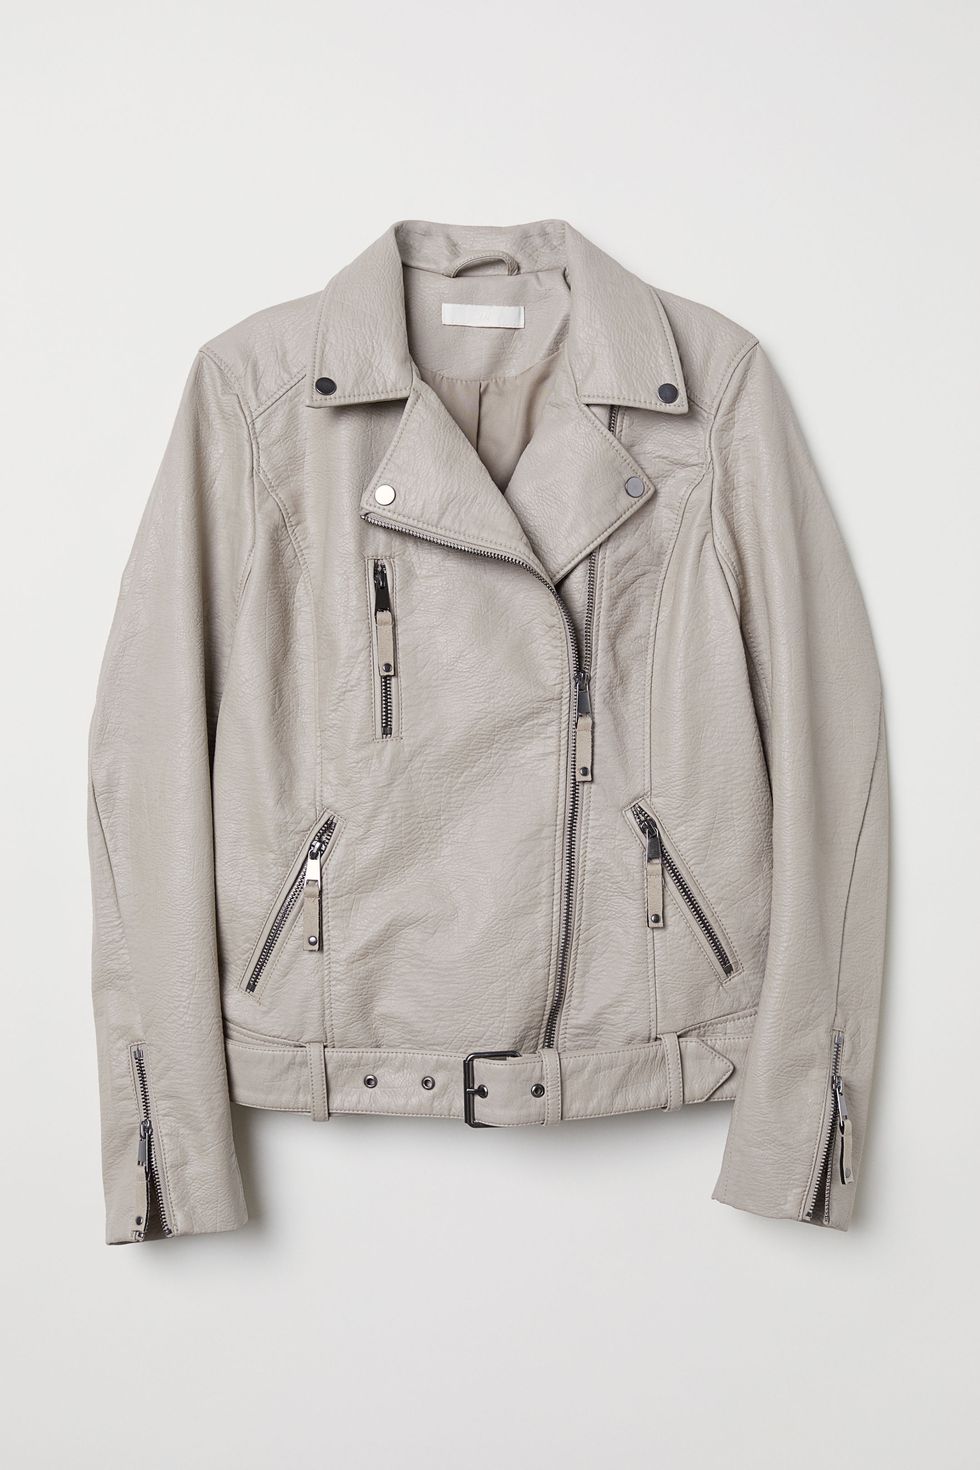 Clothing, Jacket, Outerwear, White, Sleeve, Beige, Leather, Leather jacket, Textile, Top, 